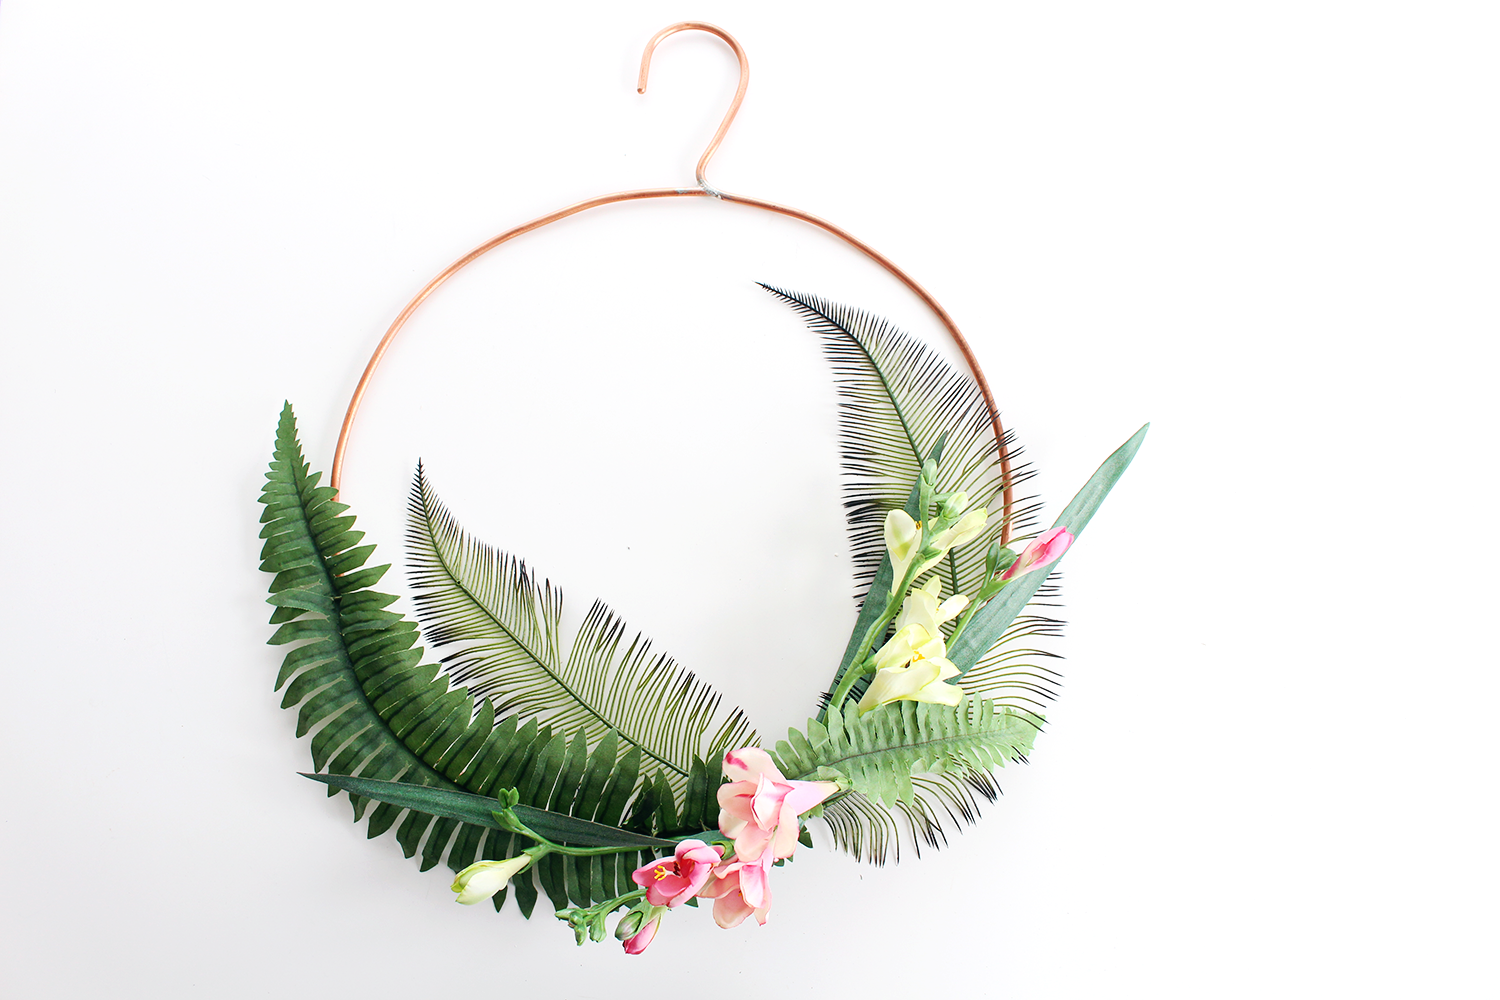 Faux Floral Skills Workshop at the Lily & Val Flagship Store in Pittsburgh. Learn how to make your own modern wreath with a tropical feel